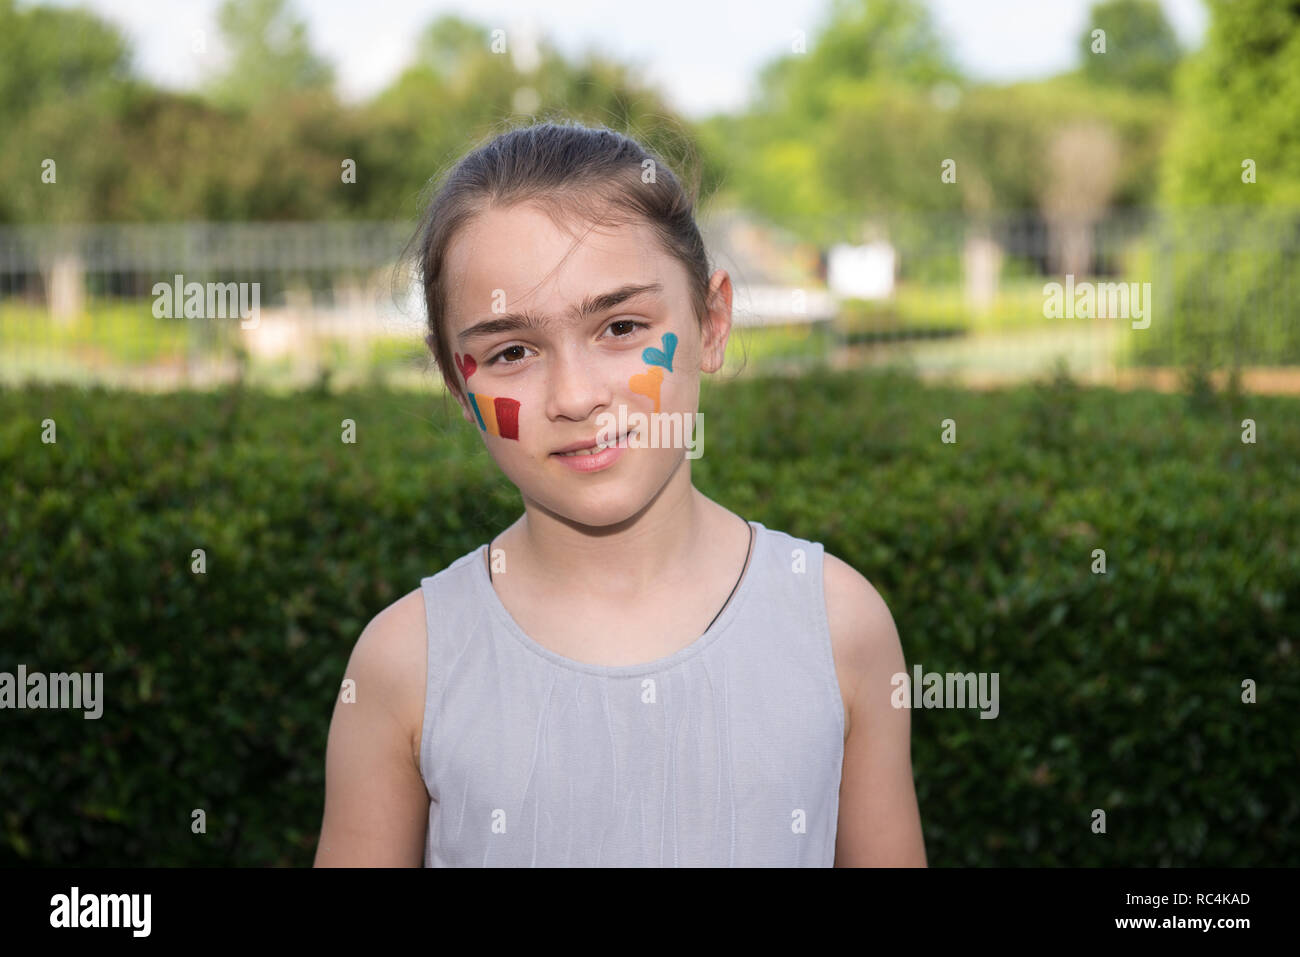 Girl with face painting symbolizing love of or Romania or Romanian flag. Stock Photo